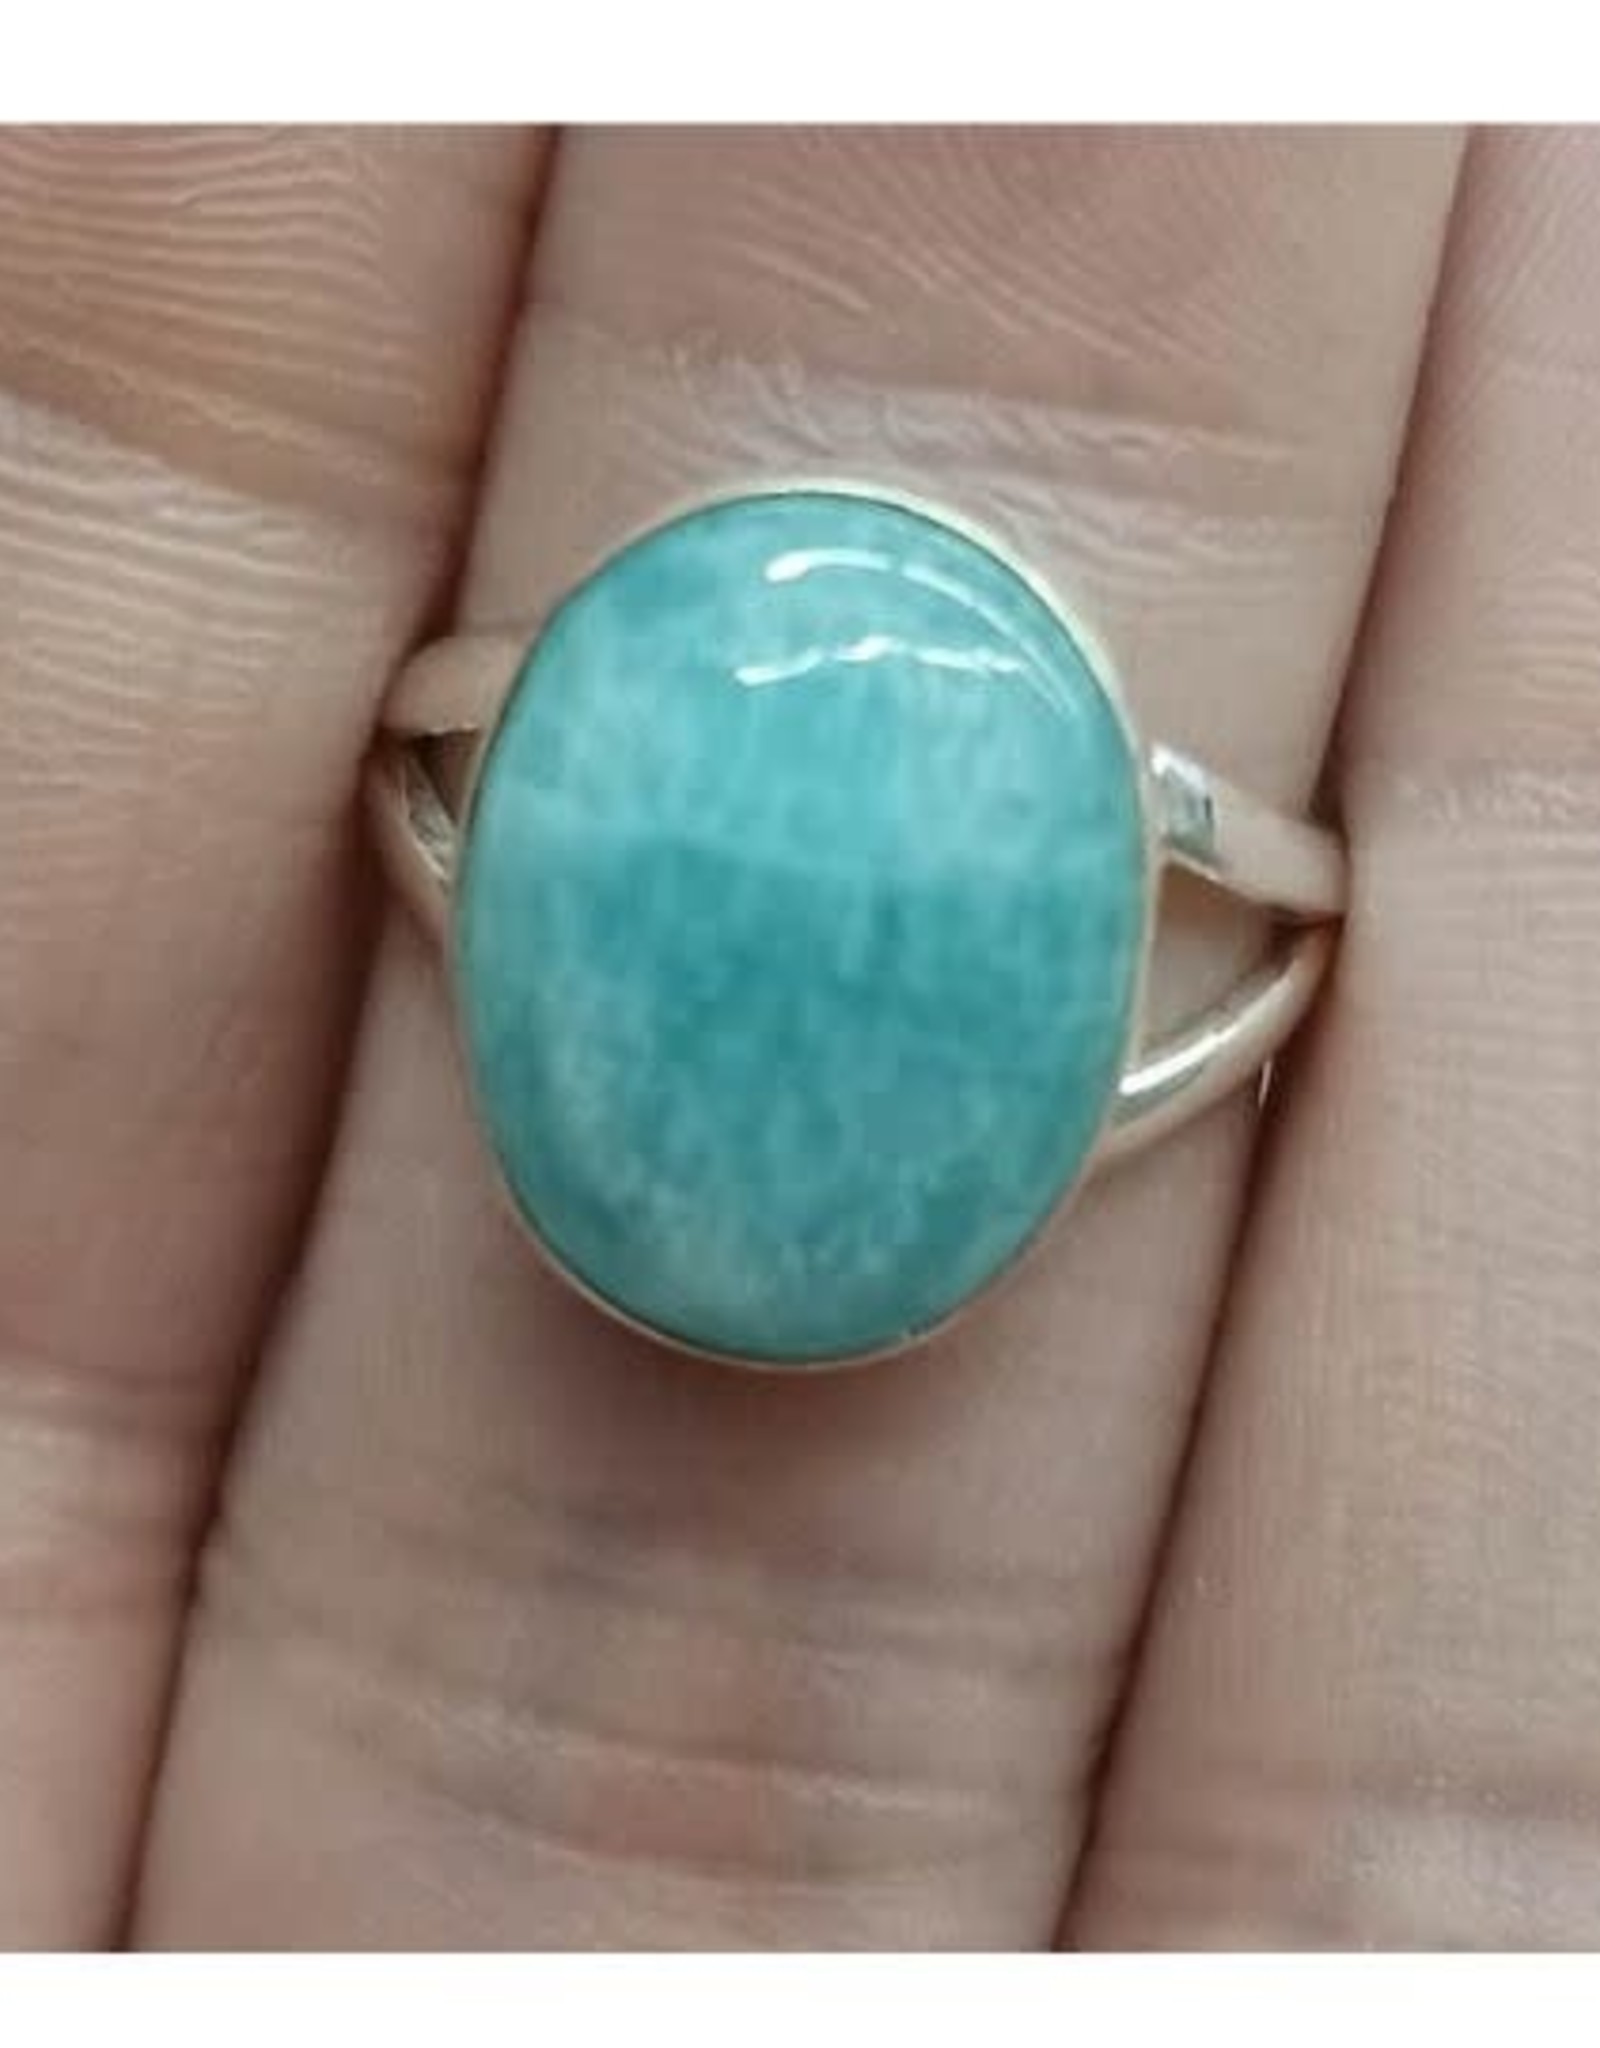 Amazonite Ring - Size 7 Sterling Silver